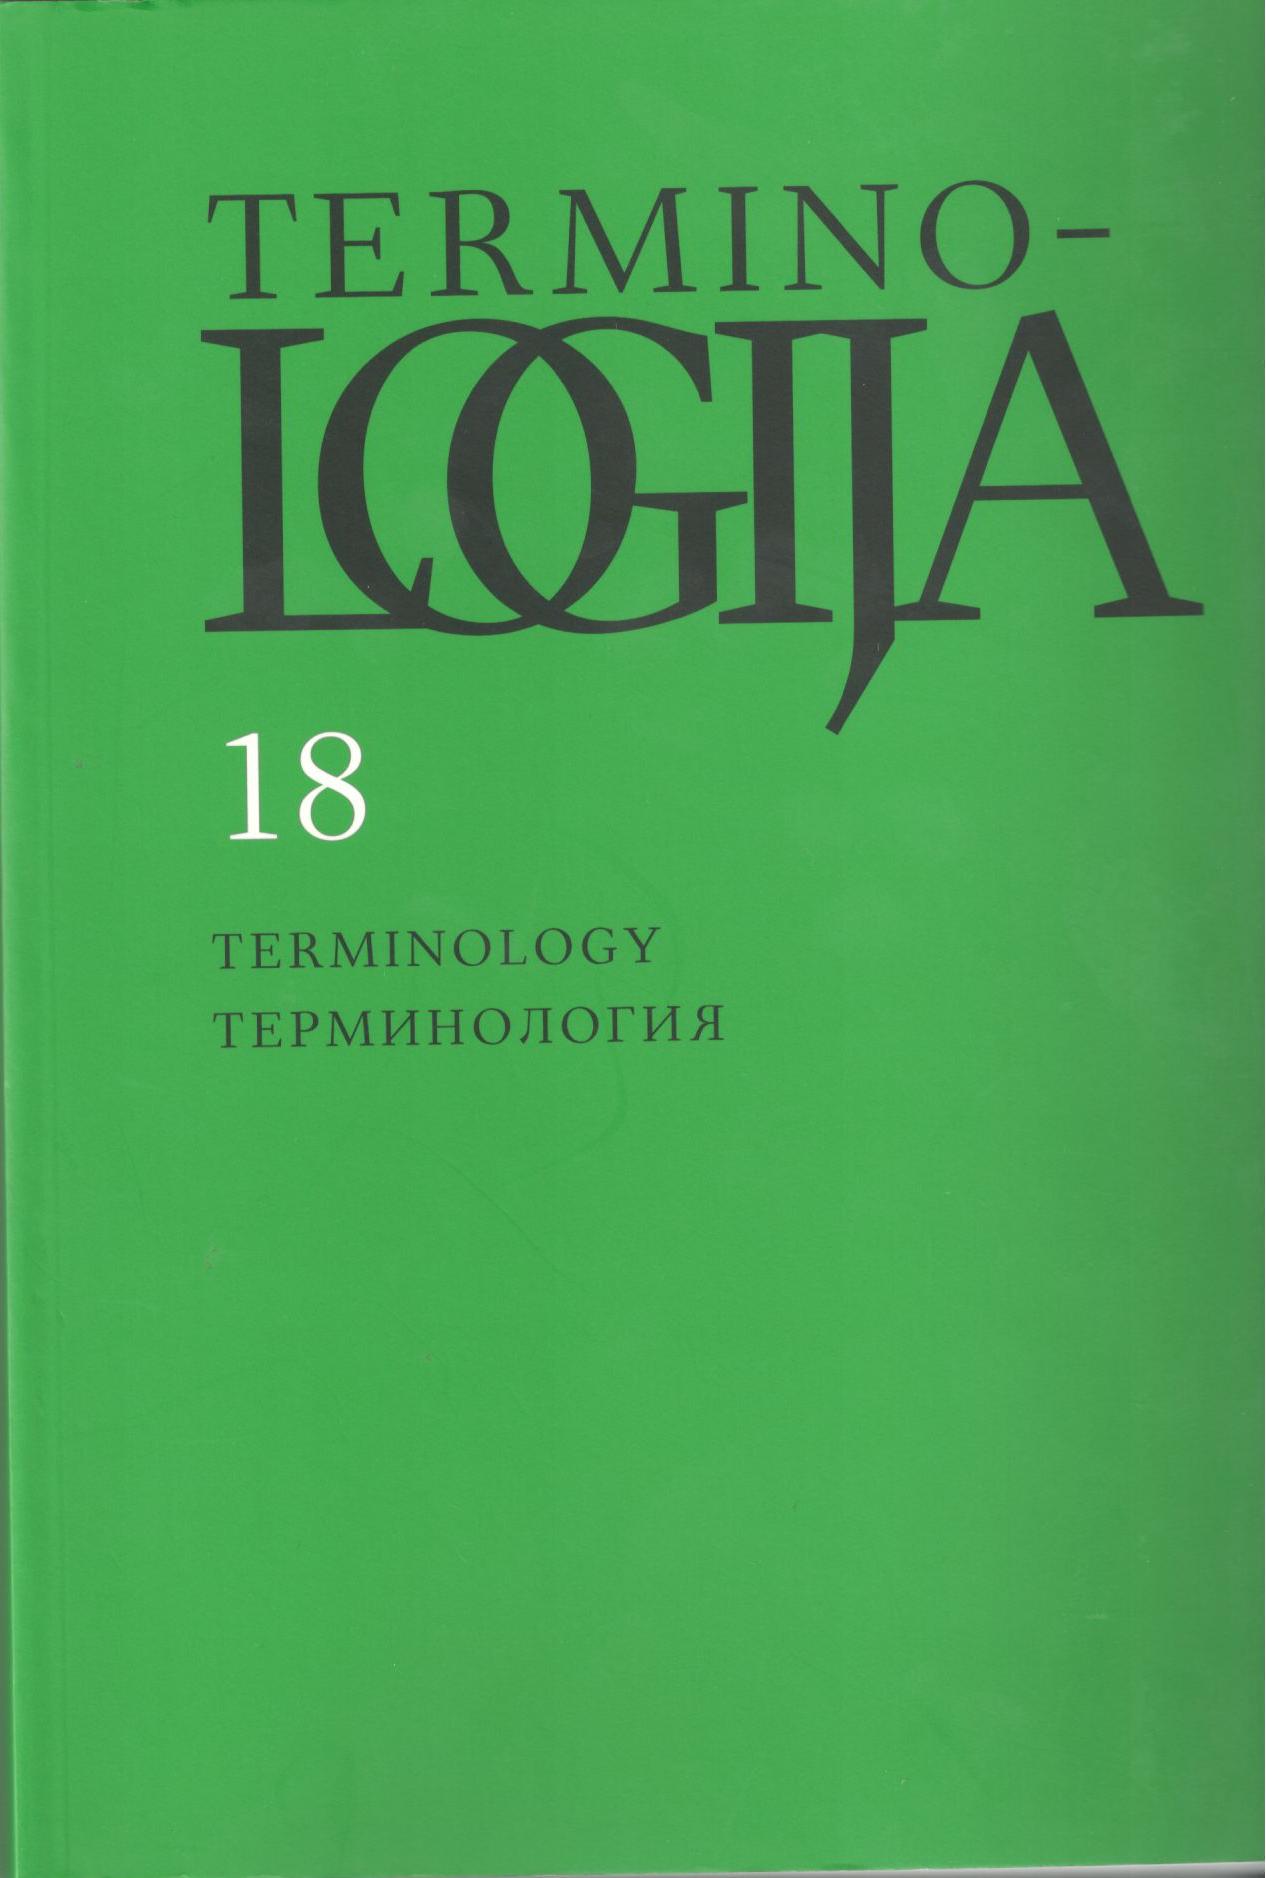 Terminological methods in the history of terminology science Cover Image